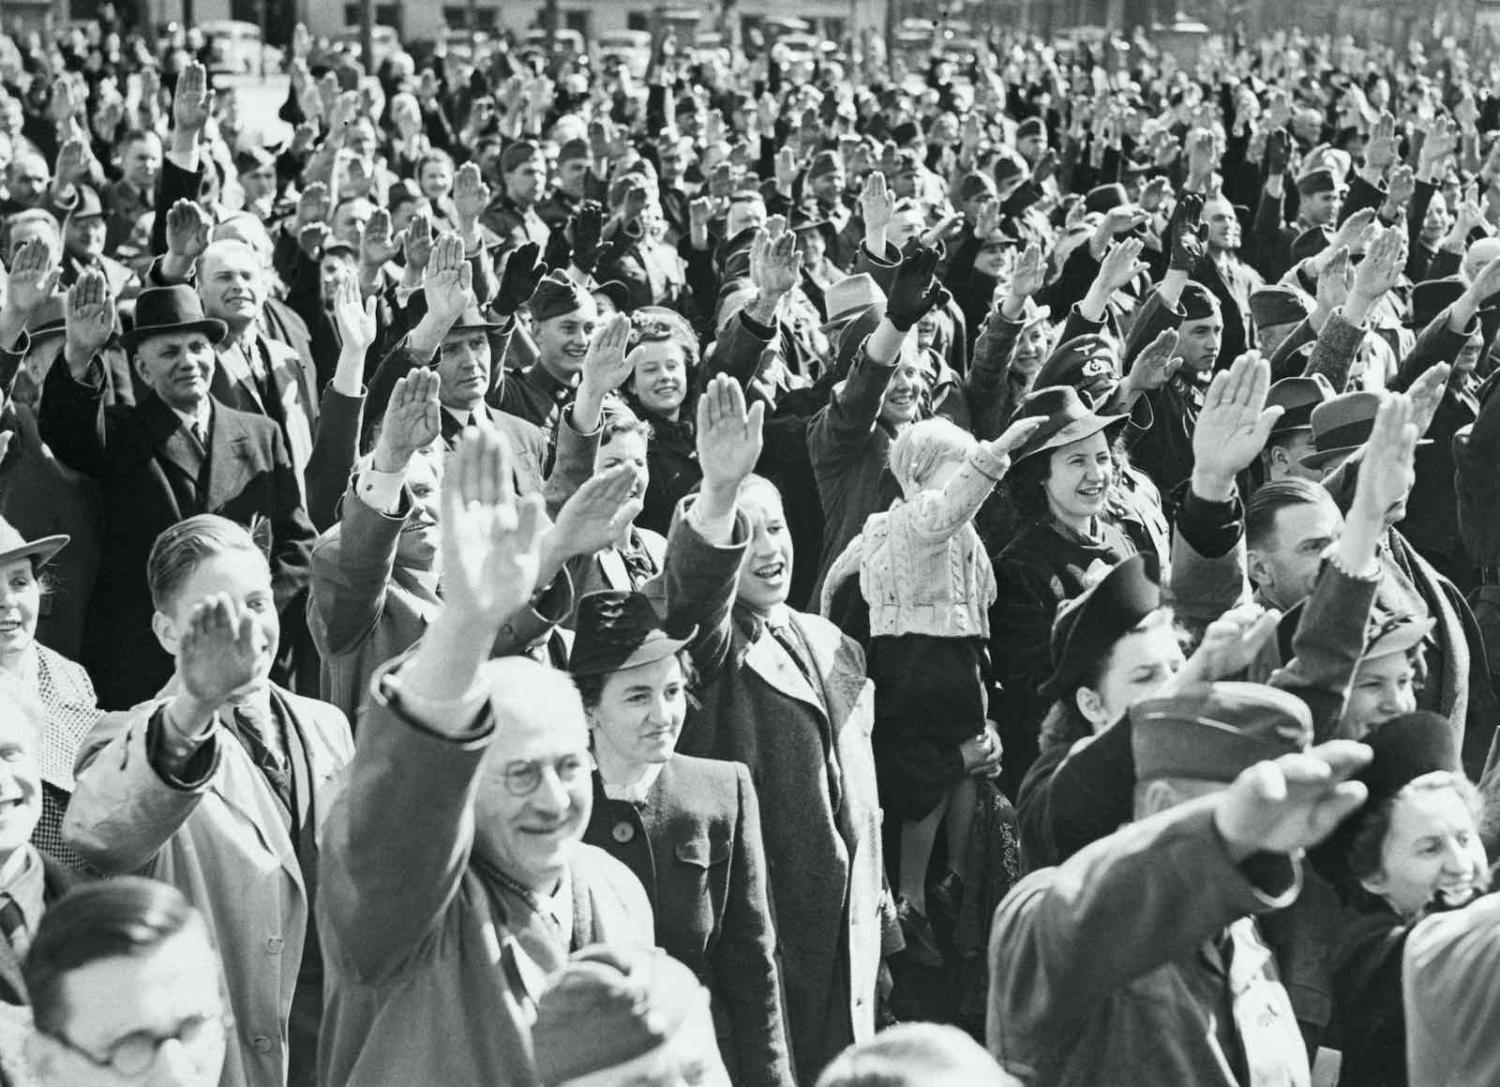 Crowds cheer Adolf Hitler on his 51st birthday in 1940 outside the Reich Chancellory, Berlin (Getty Images)